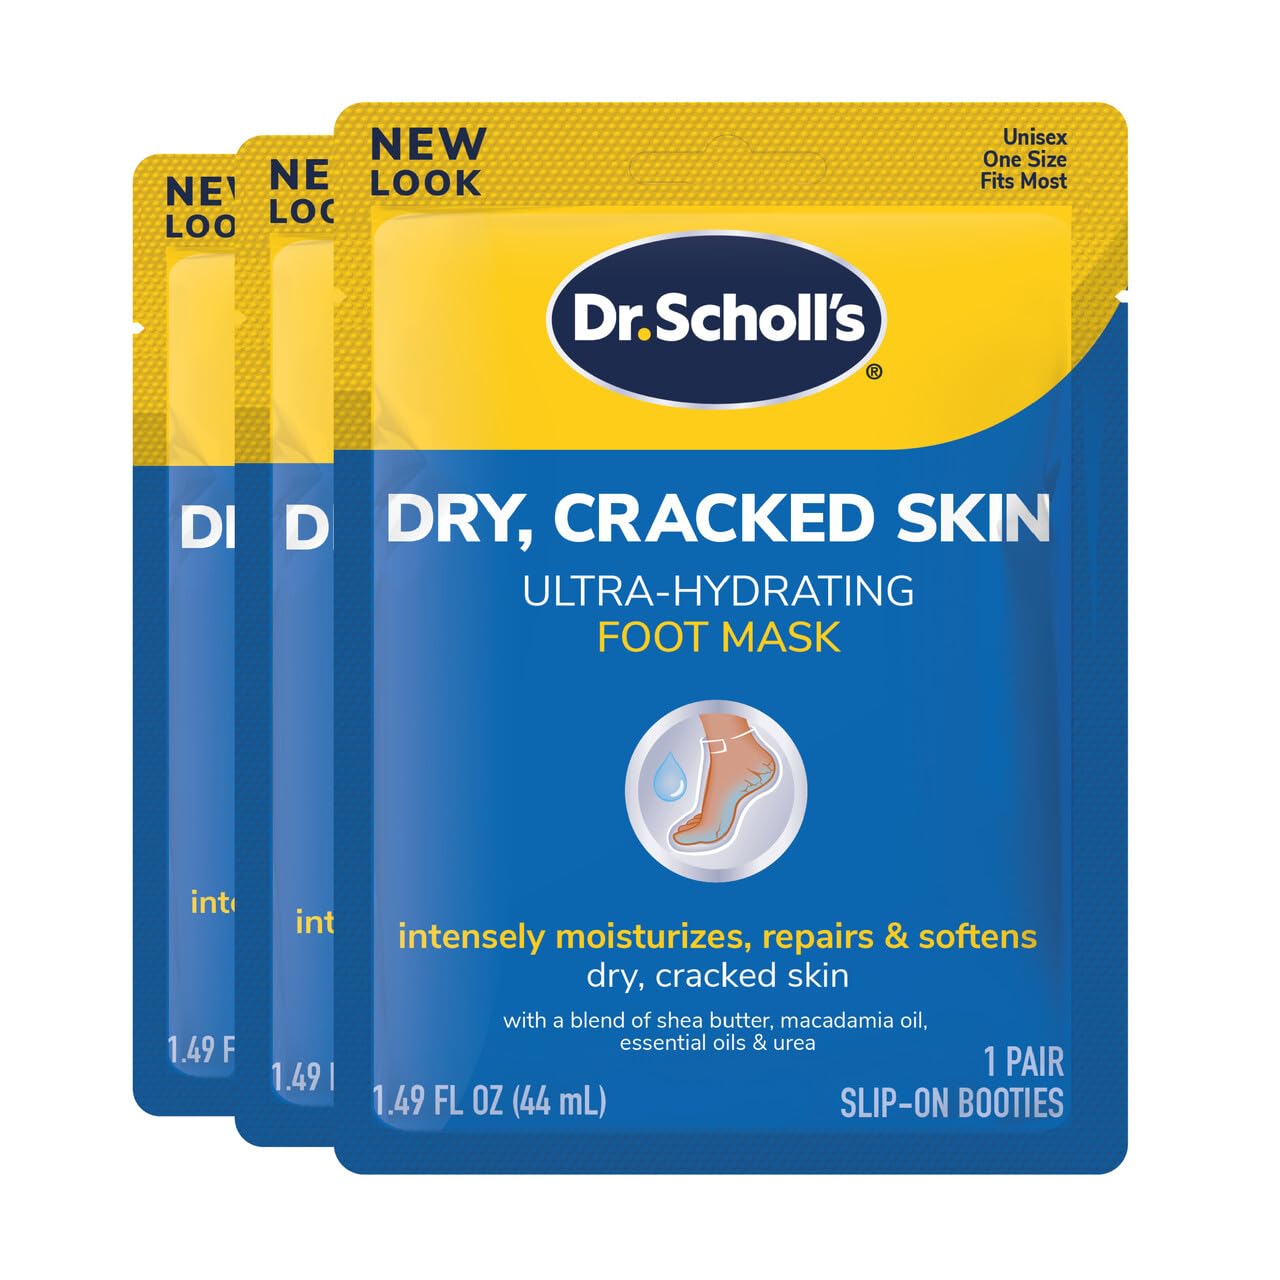 Dr. Scholl's Dry, Cracked Skin Ultra Hydrating Foot Mask 3 Pk, Intensely Moisturizes, Repairs, Softens Rough Dry Skin on Feet with Urea & Essential Oils, Foot Care, Disposable Foot Moisturizing Socks